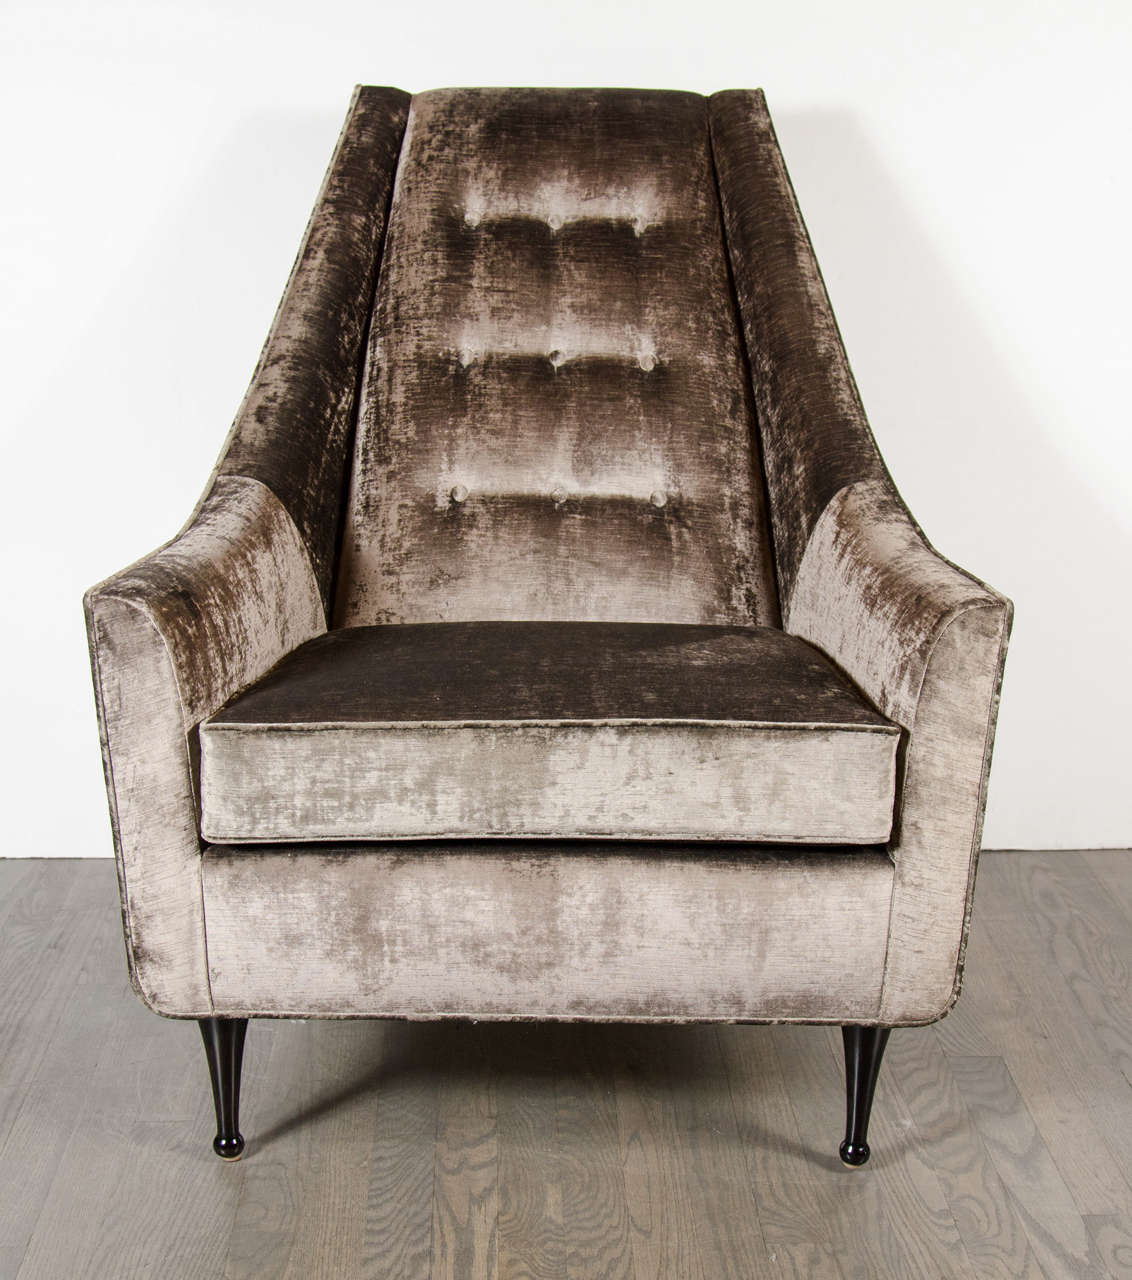 This luxurious chair features a cylindrical form tapered leg in ebonized walnut and has been newly upholstered in a smokey grey velvet. The chair also features button back detailing and the modernist design of the chair is sleigh form. This chair